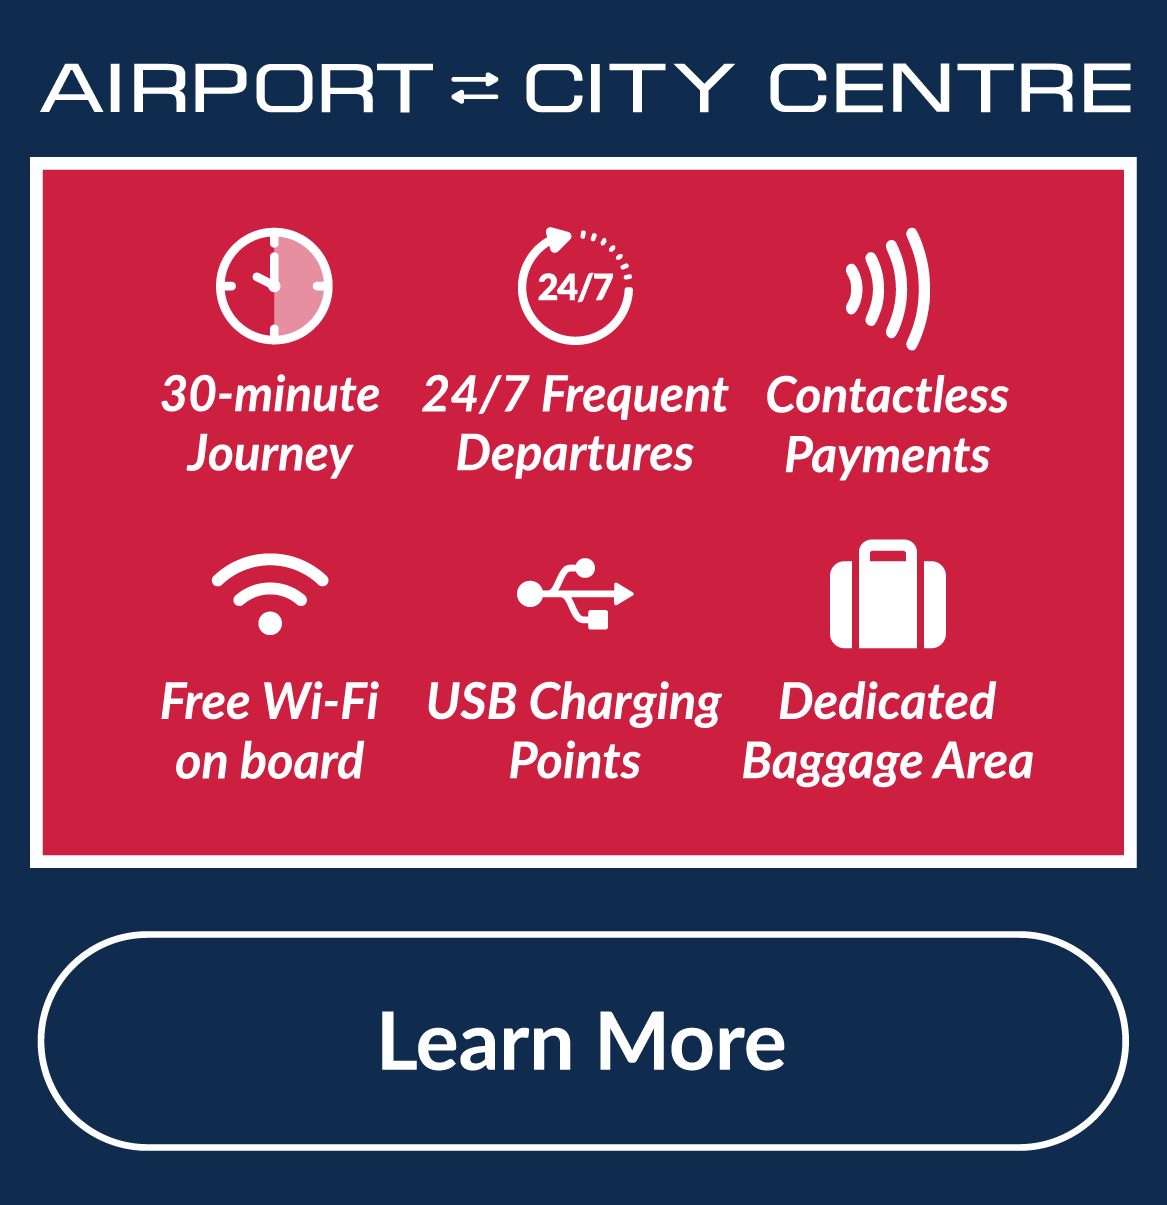 Airport to City Center. 30 minute journey. Contactless payments. 24/7 frequent departures. Free Wi-Fi on board. USB Charging Points. Dedicated Baggage Area.